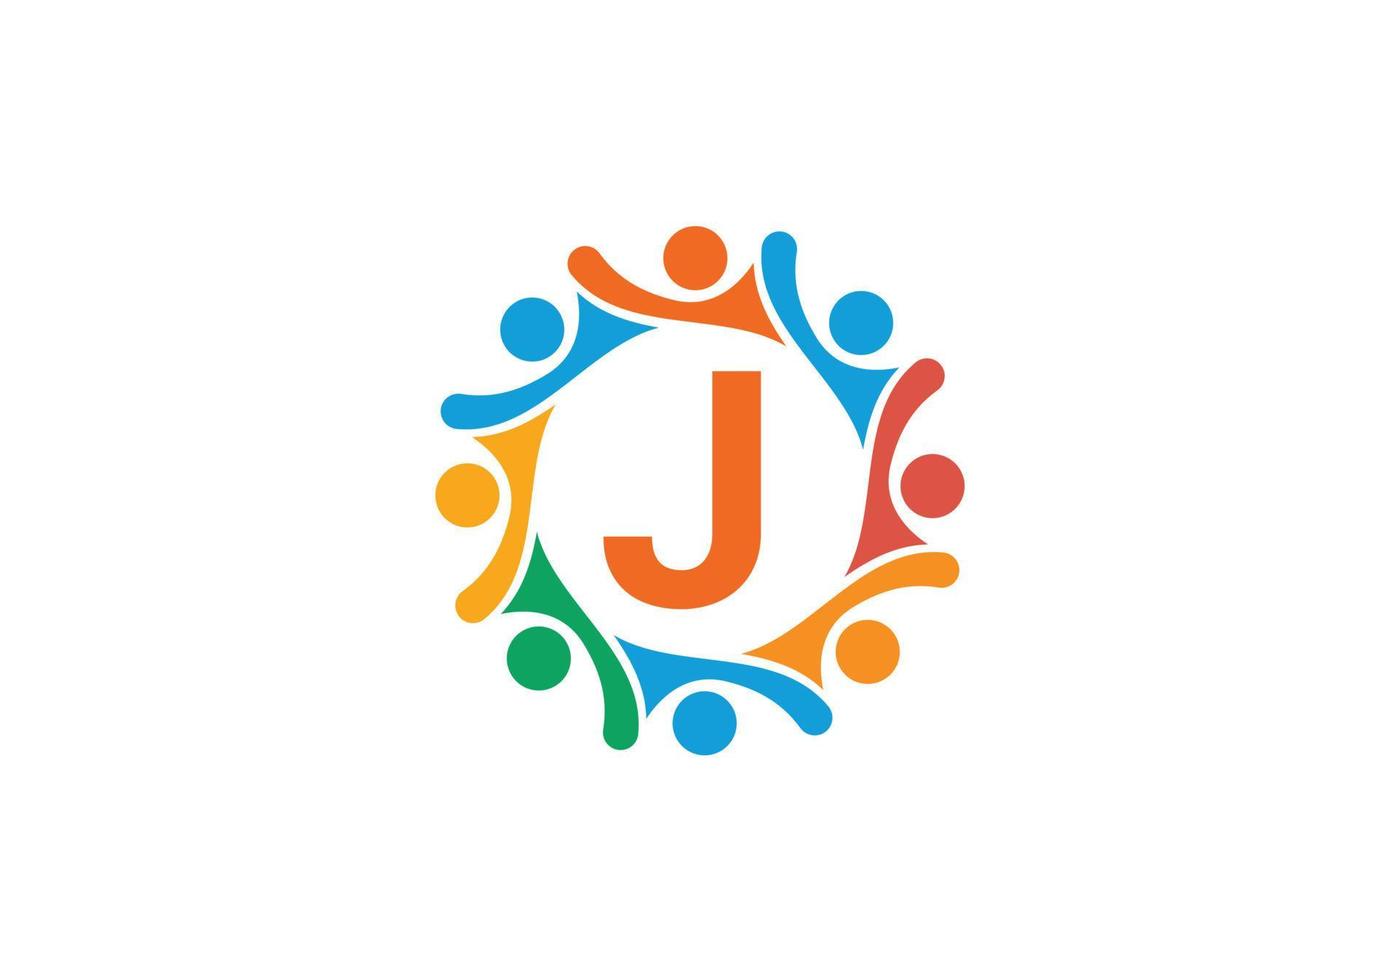 this is creative letter J icon logo design vector